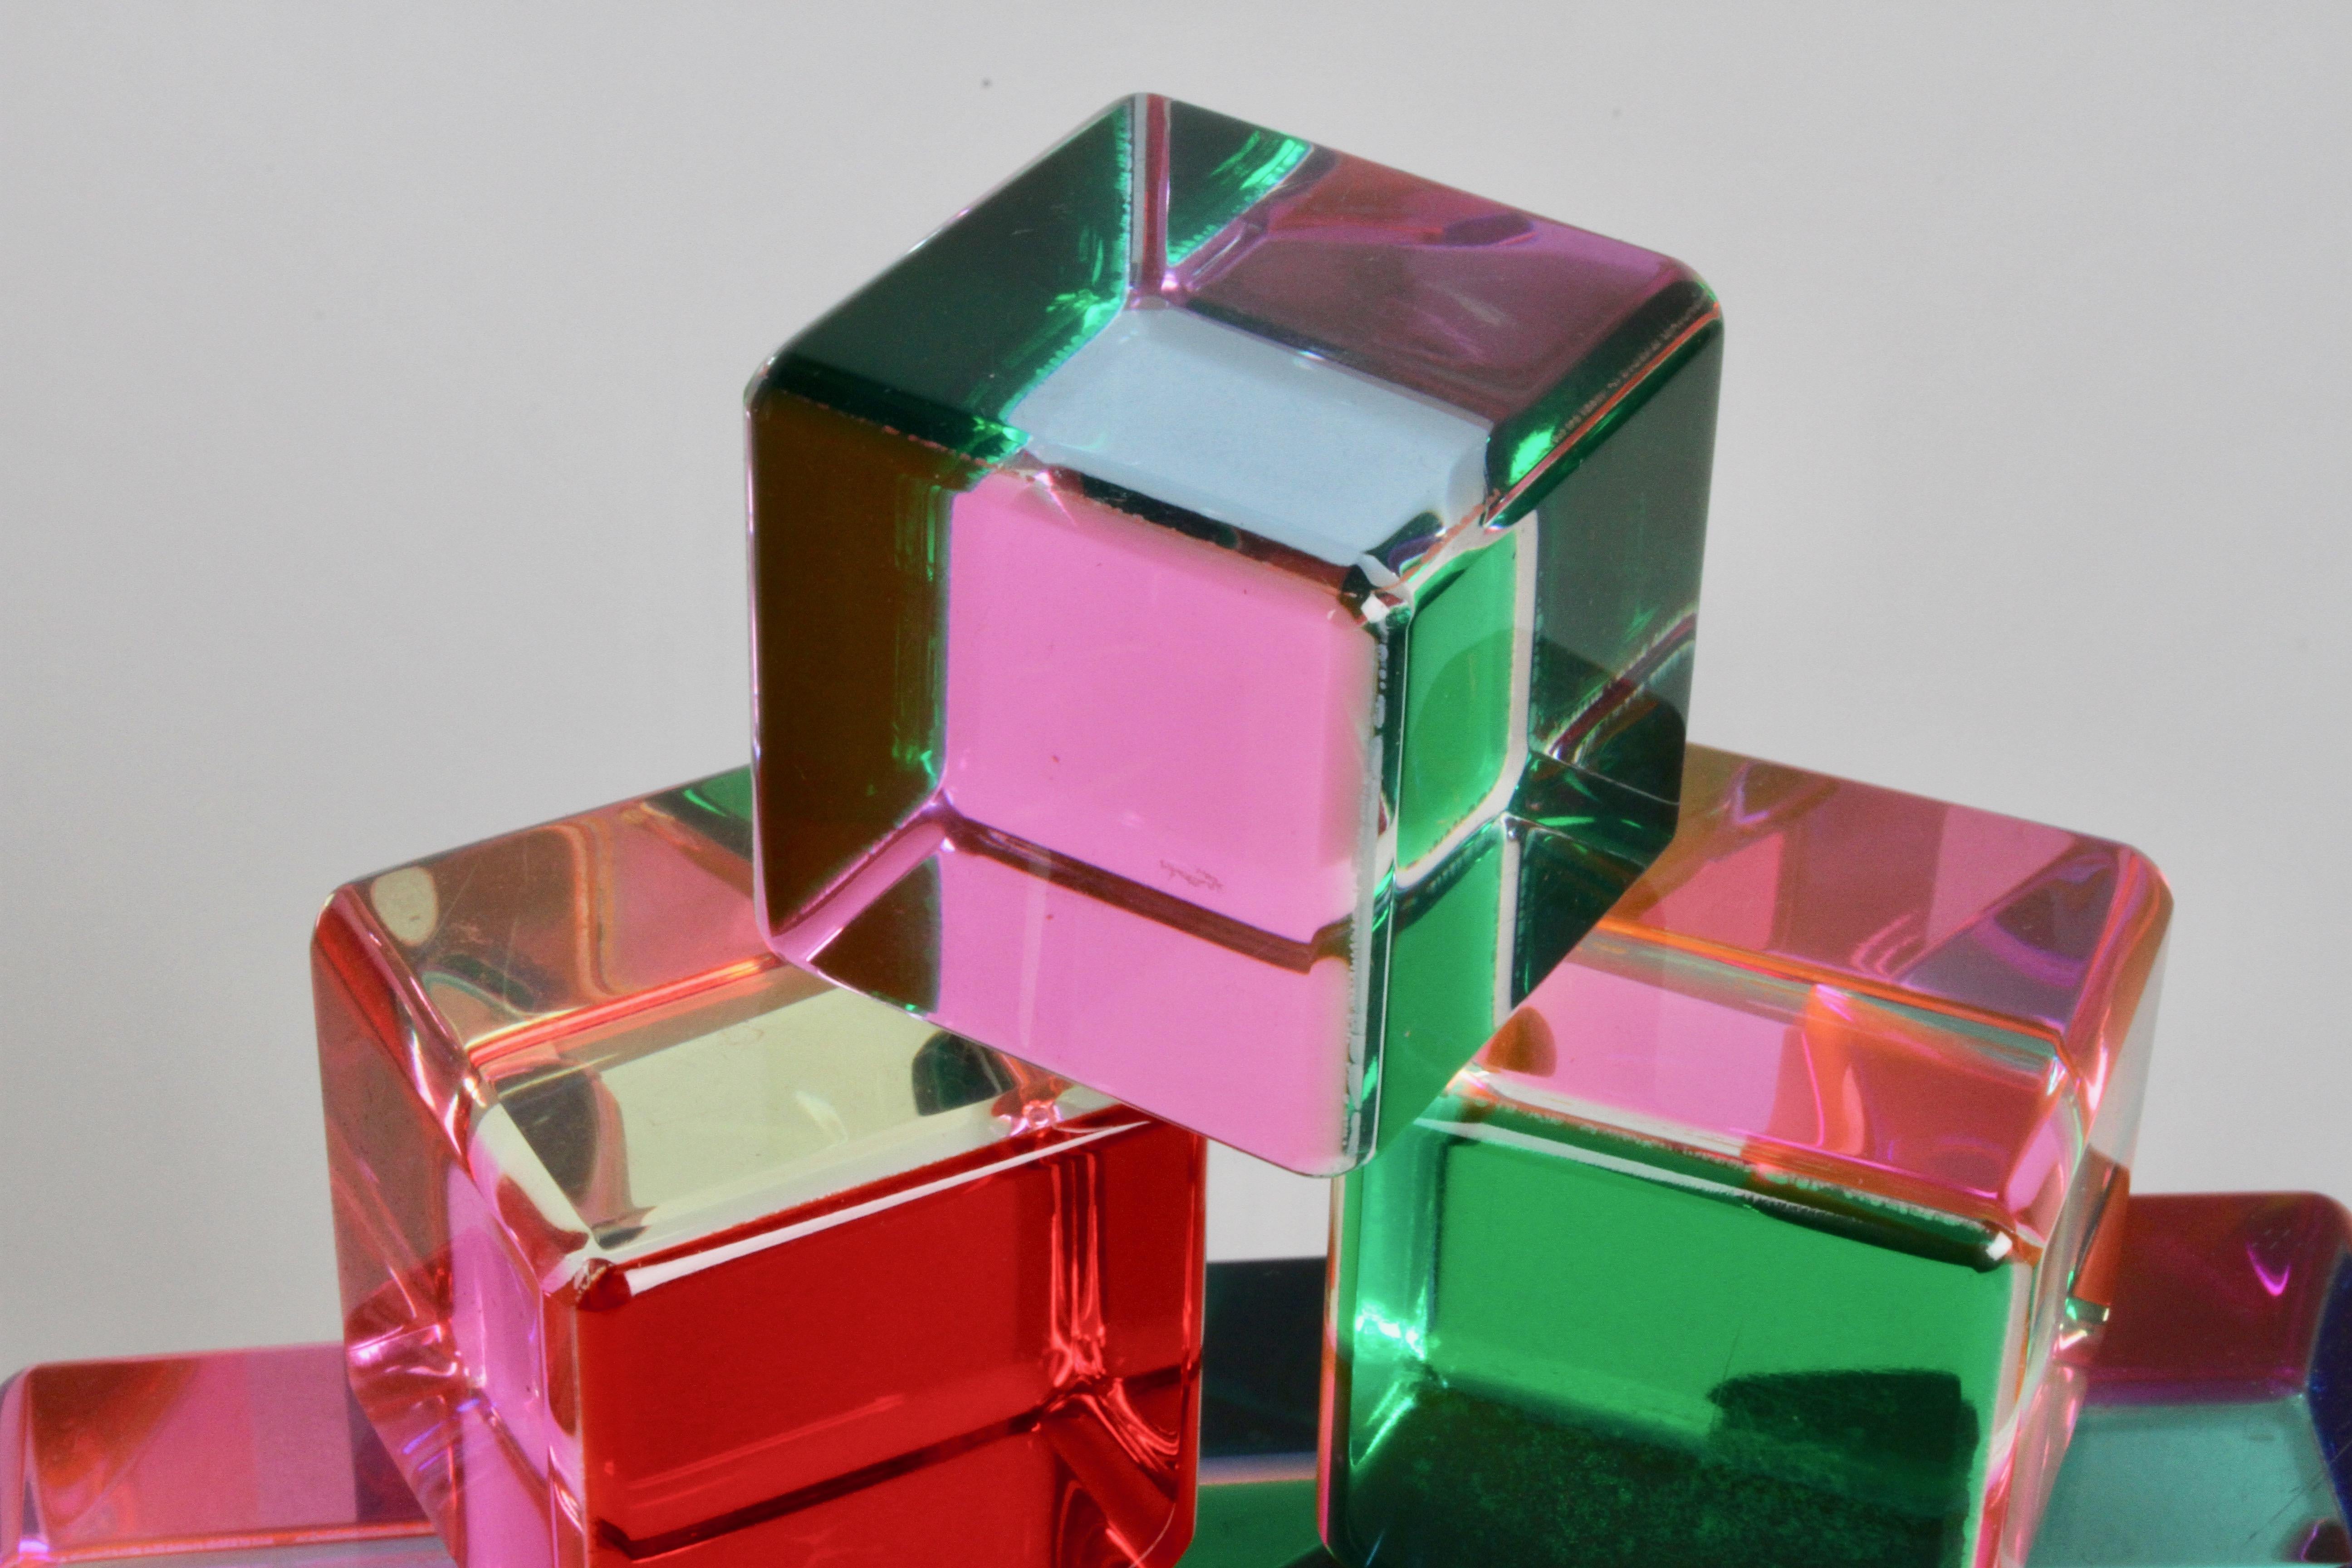 Late 20th Century Set of 10 Signed Vasa Mihich Lucite Laminated Op-Art Cube Sculptures Dated 1989